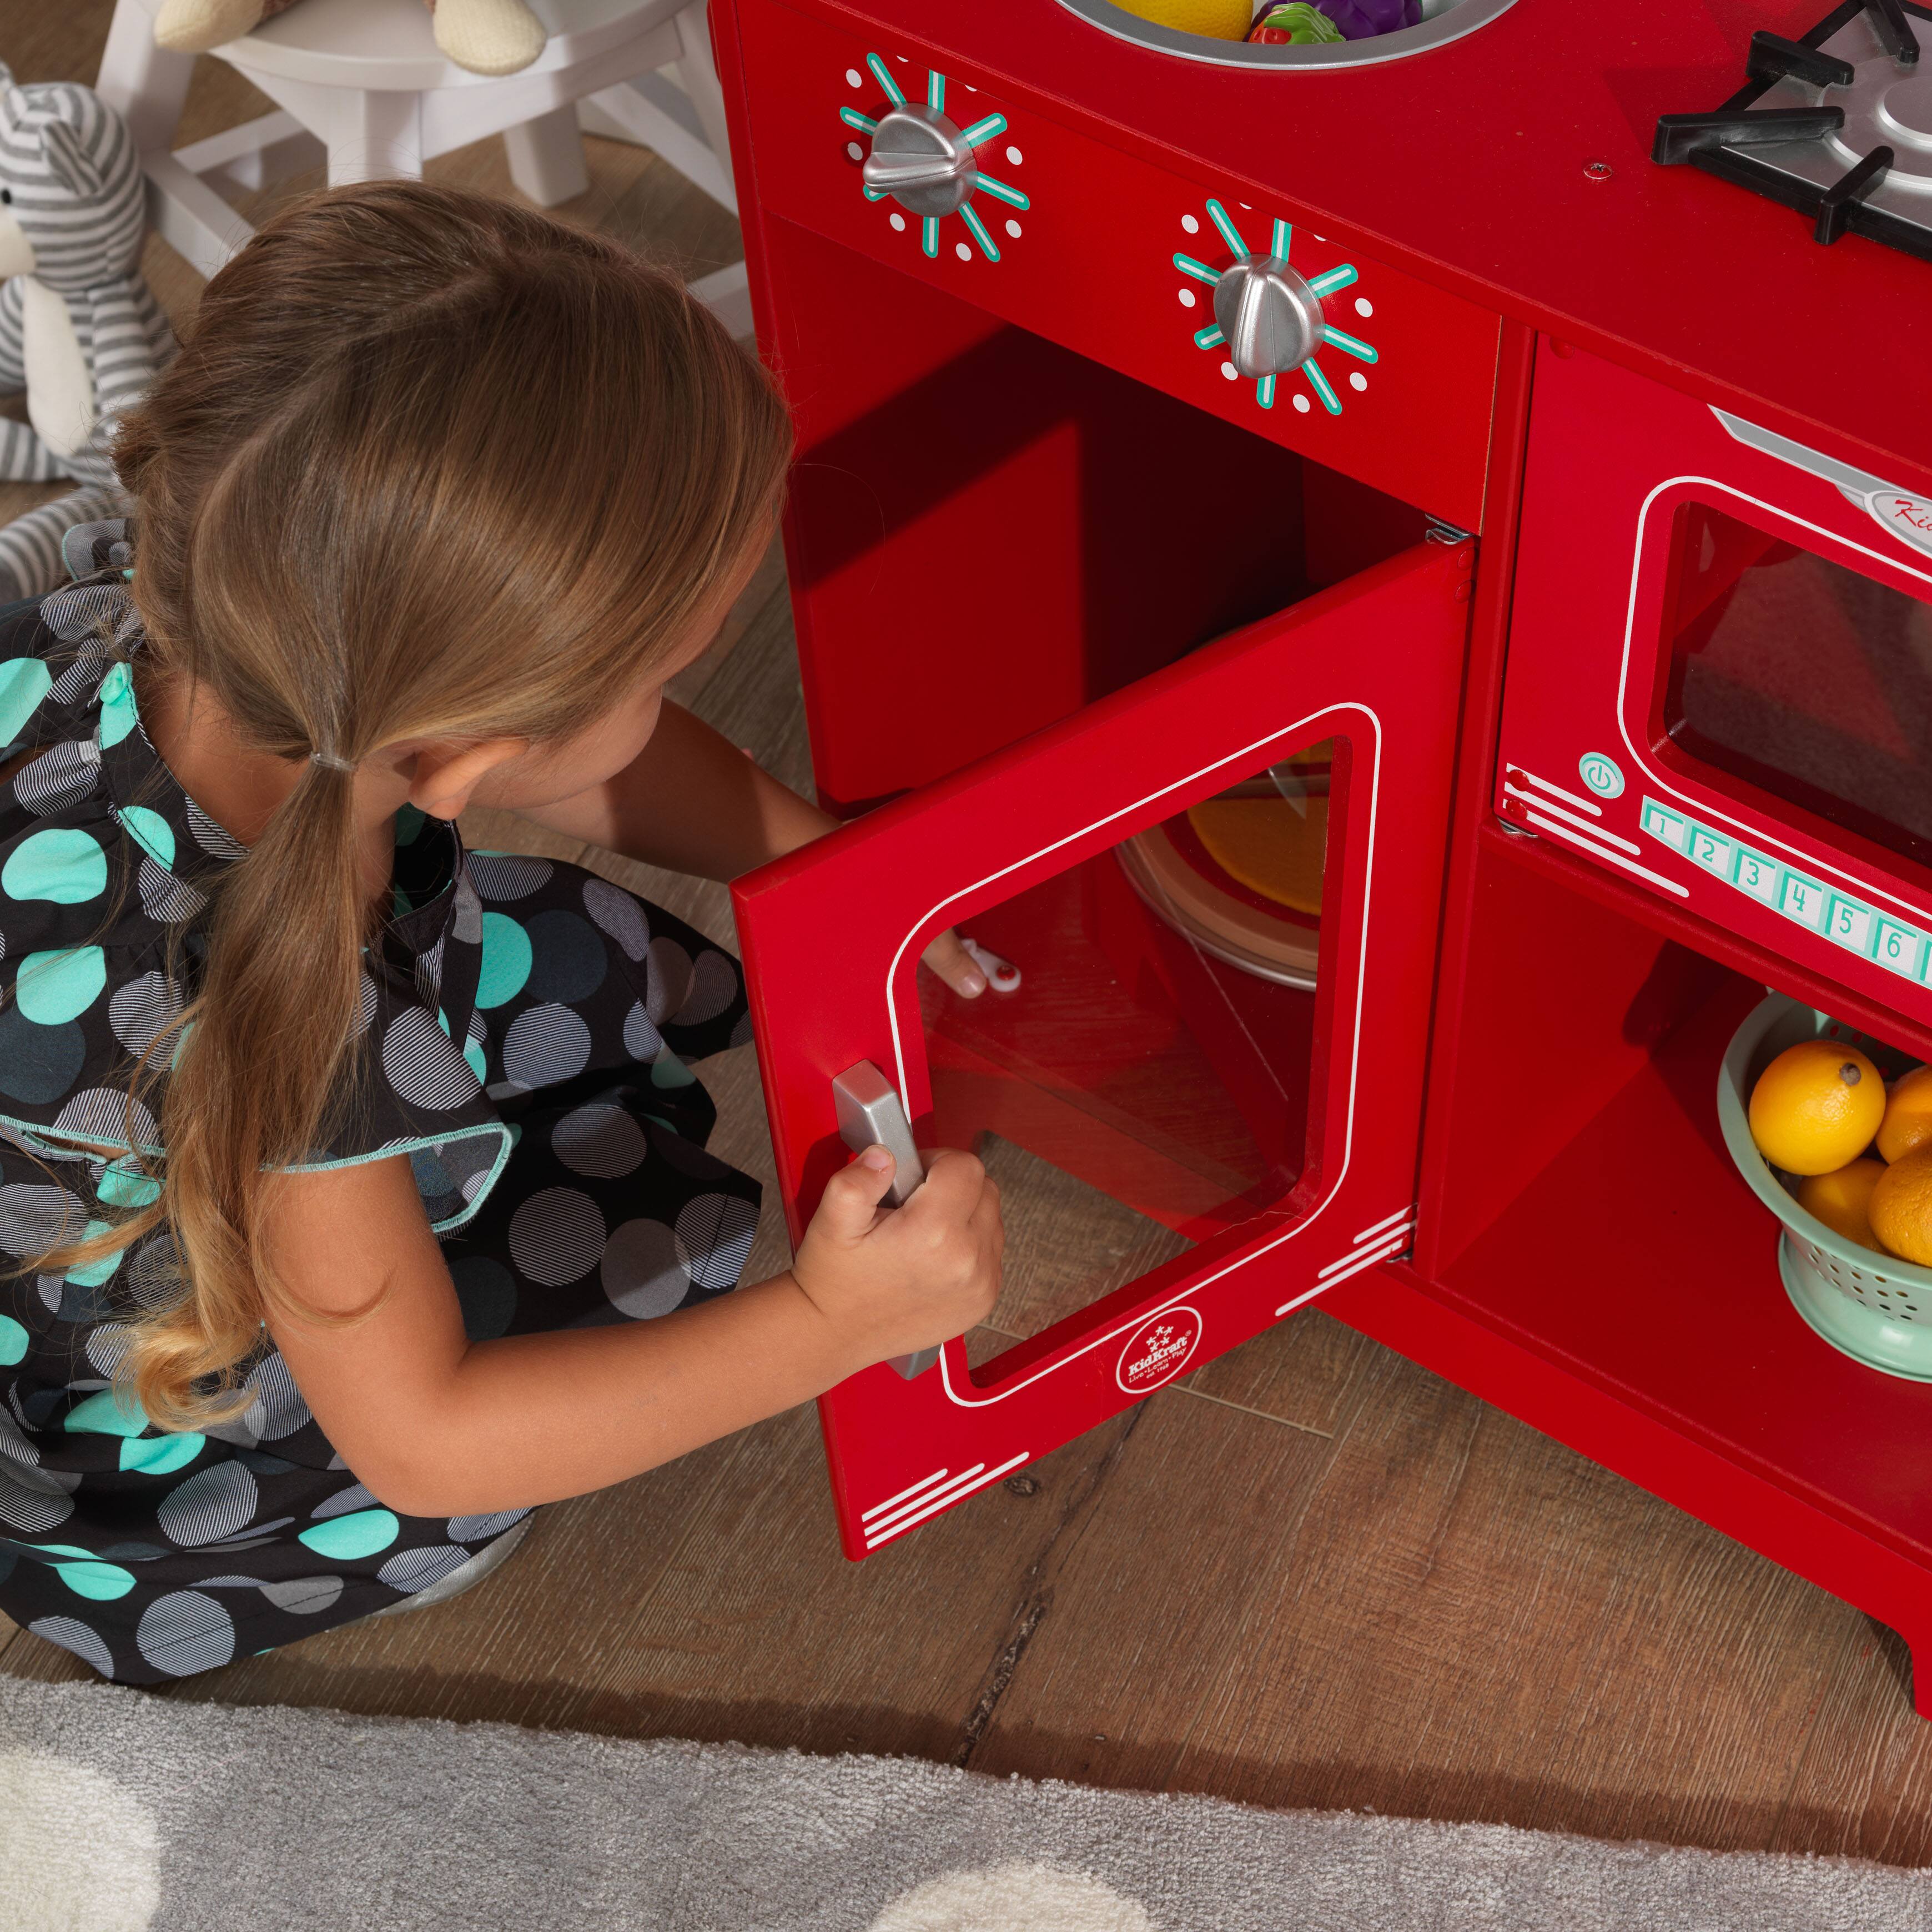 KidKraft Red Vintage Wooden Play Kitchen with Play Phone